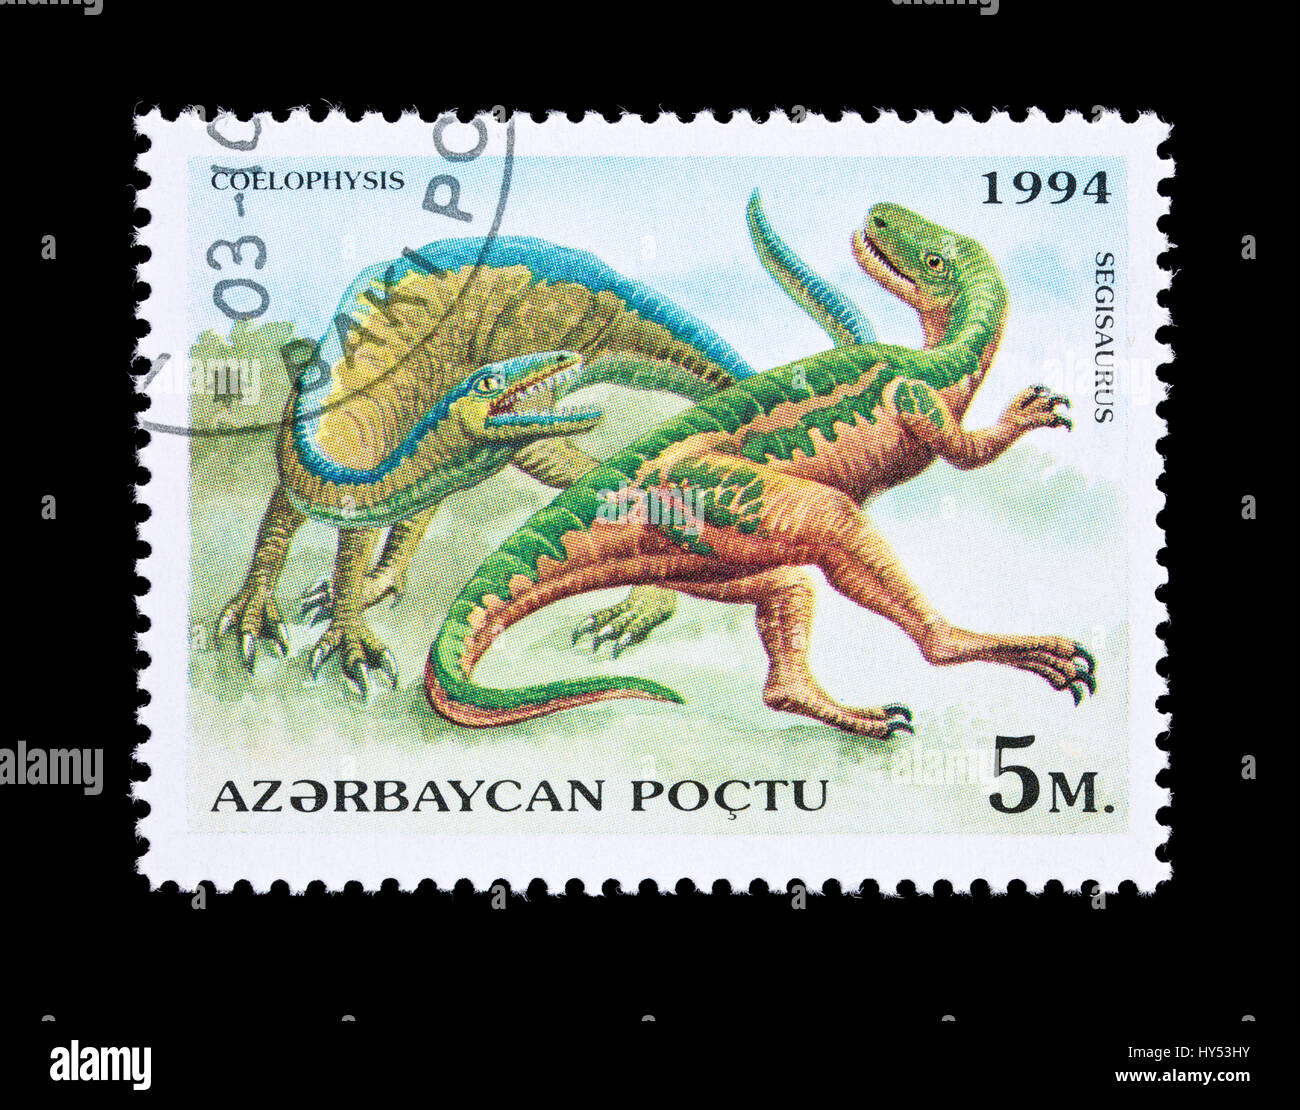 Postage stamp from Azerbaijan depicting a coelophysis and segisaurus dinosaurs Stock Photo